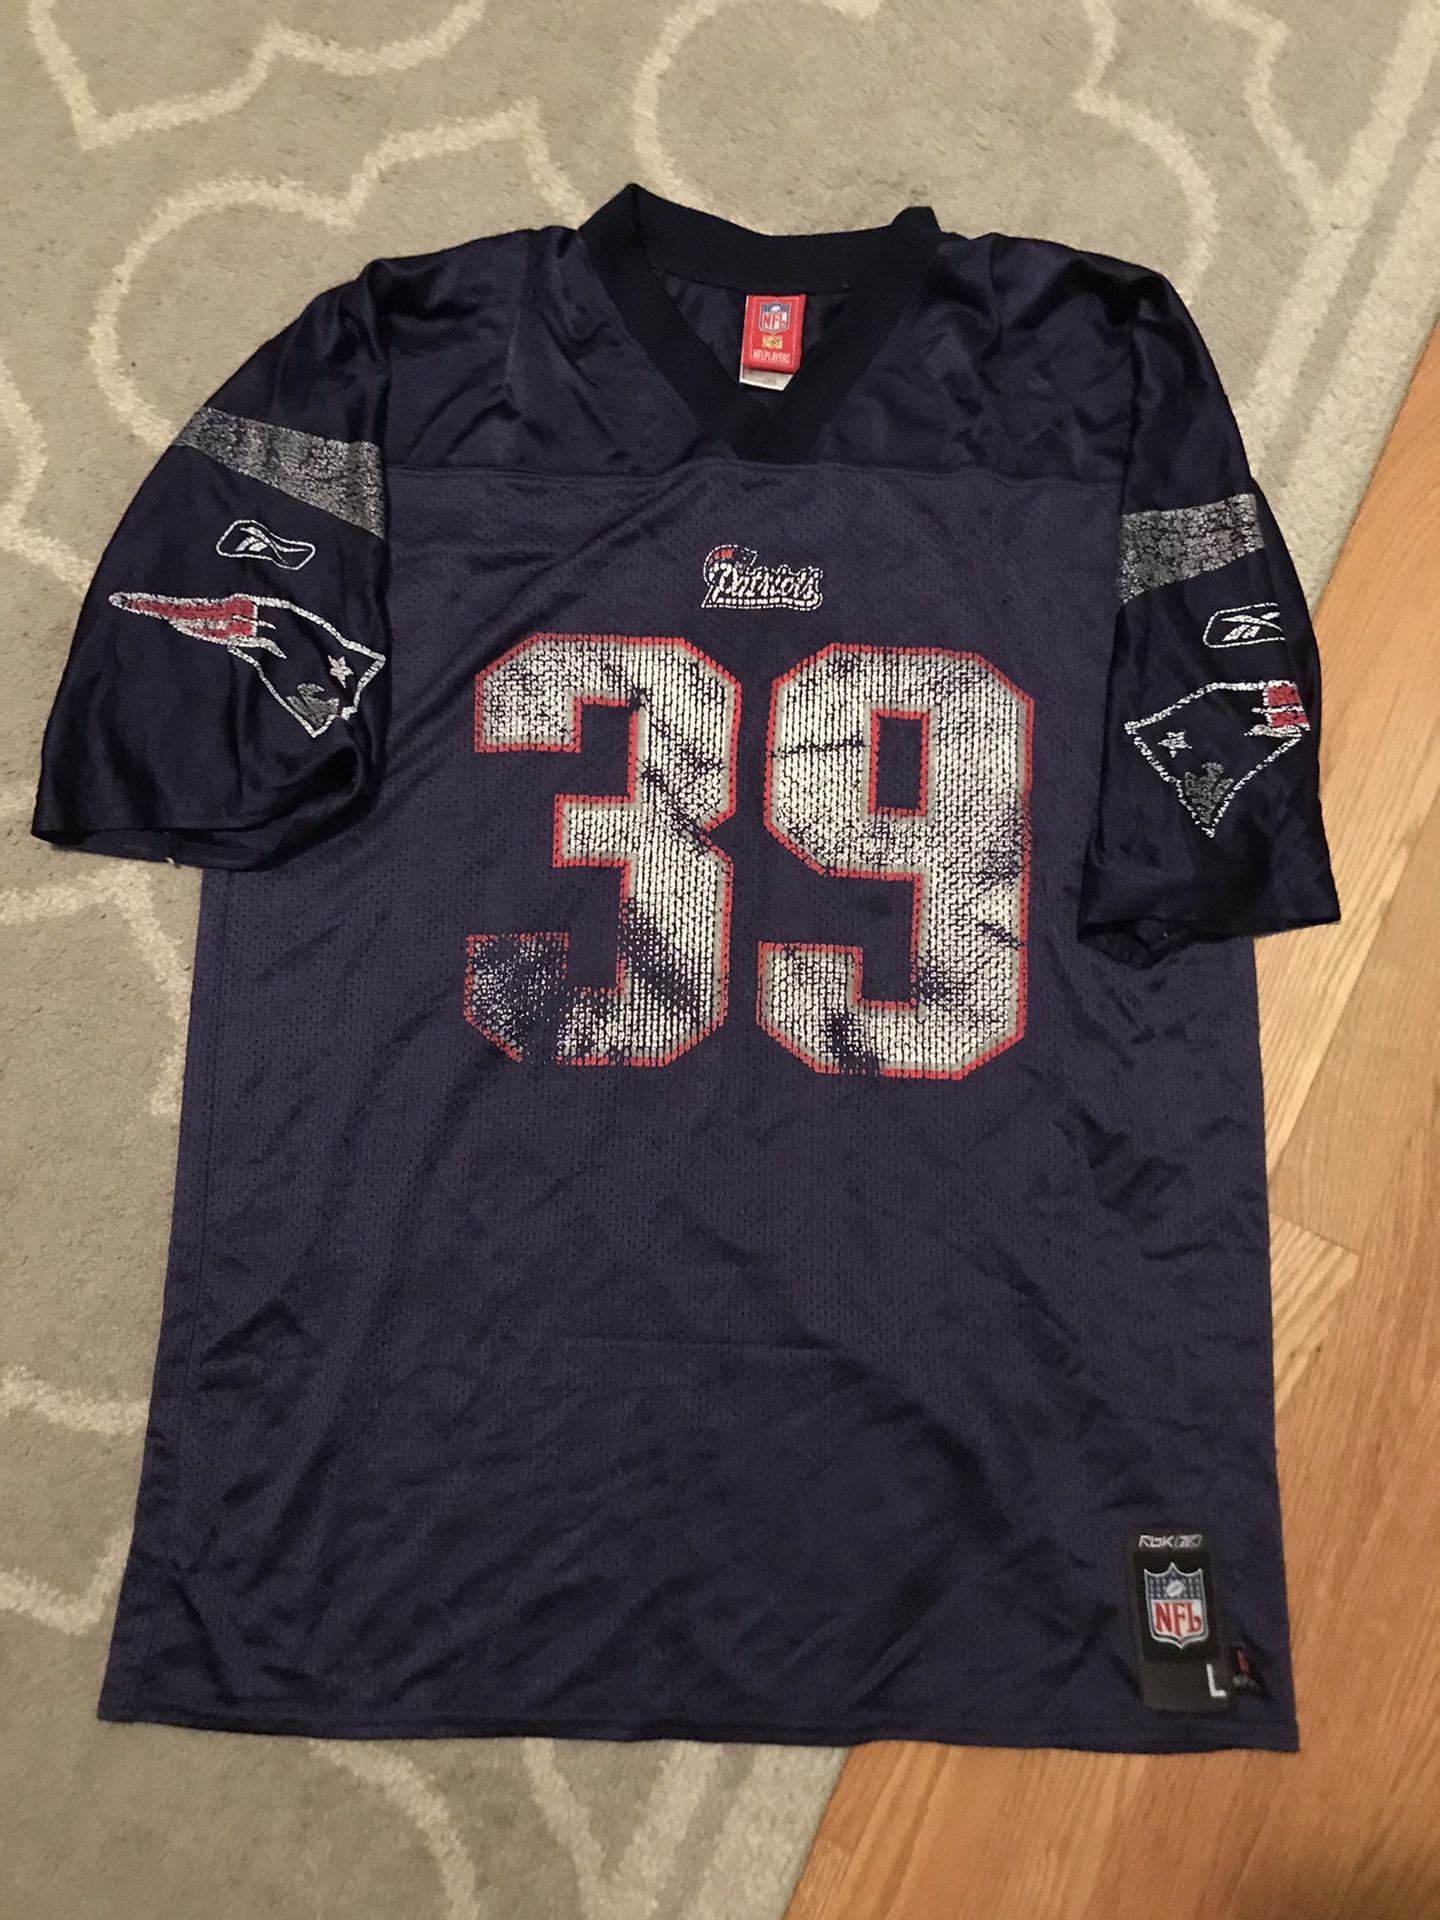 New England Patriots Large Reebok NFL Jersey Adult Football Fast Shipping 